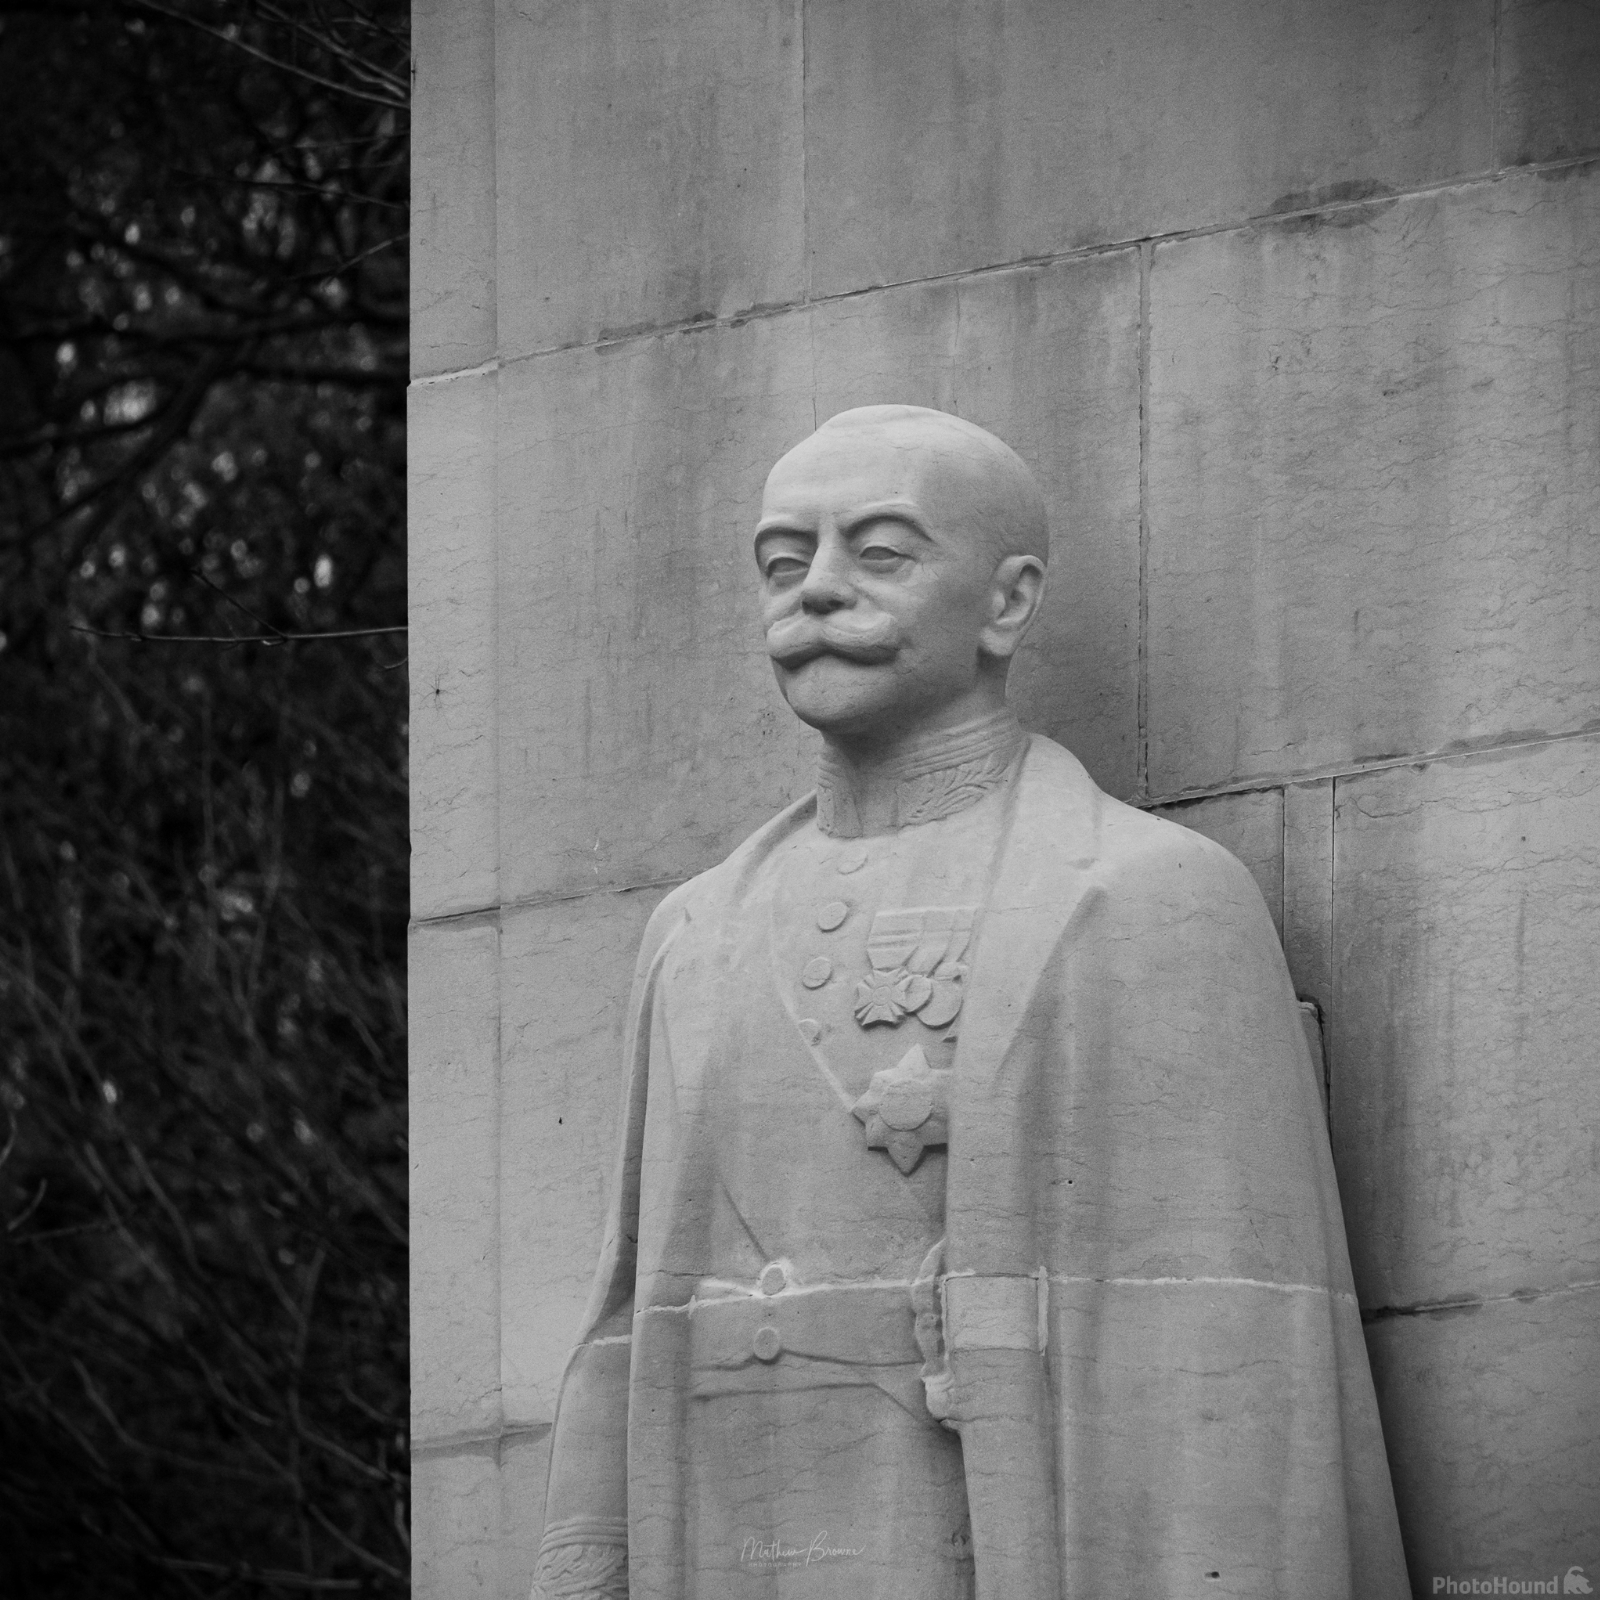 Image of Le Monument Adolphe Max by Mathew Browne